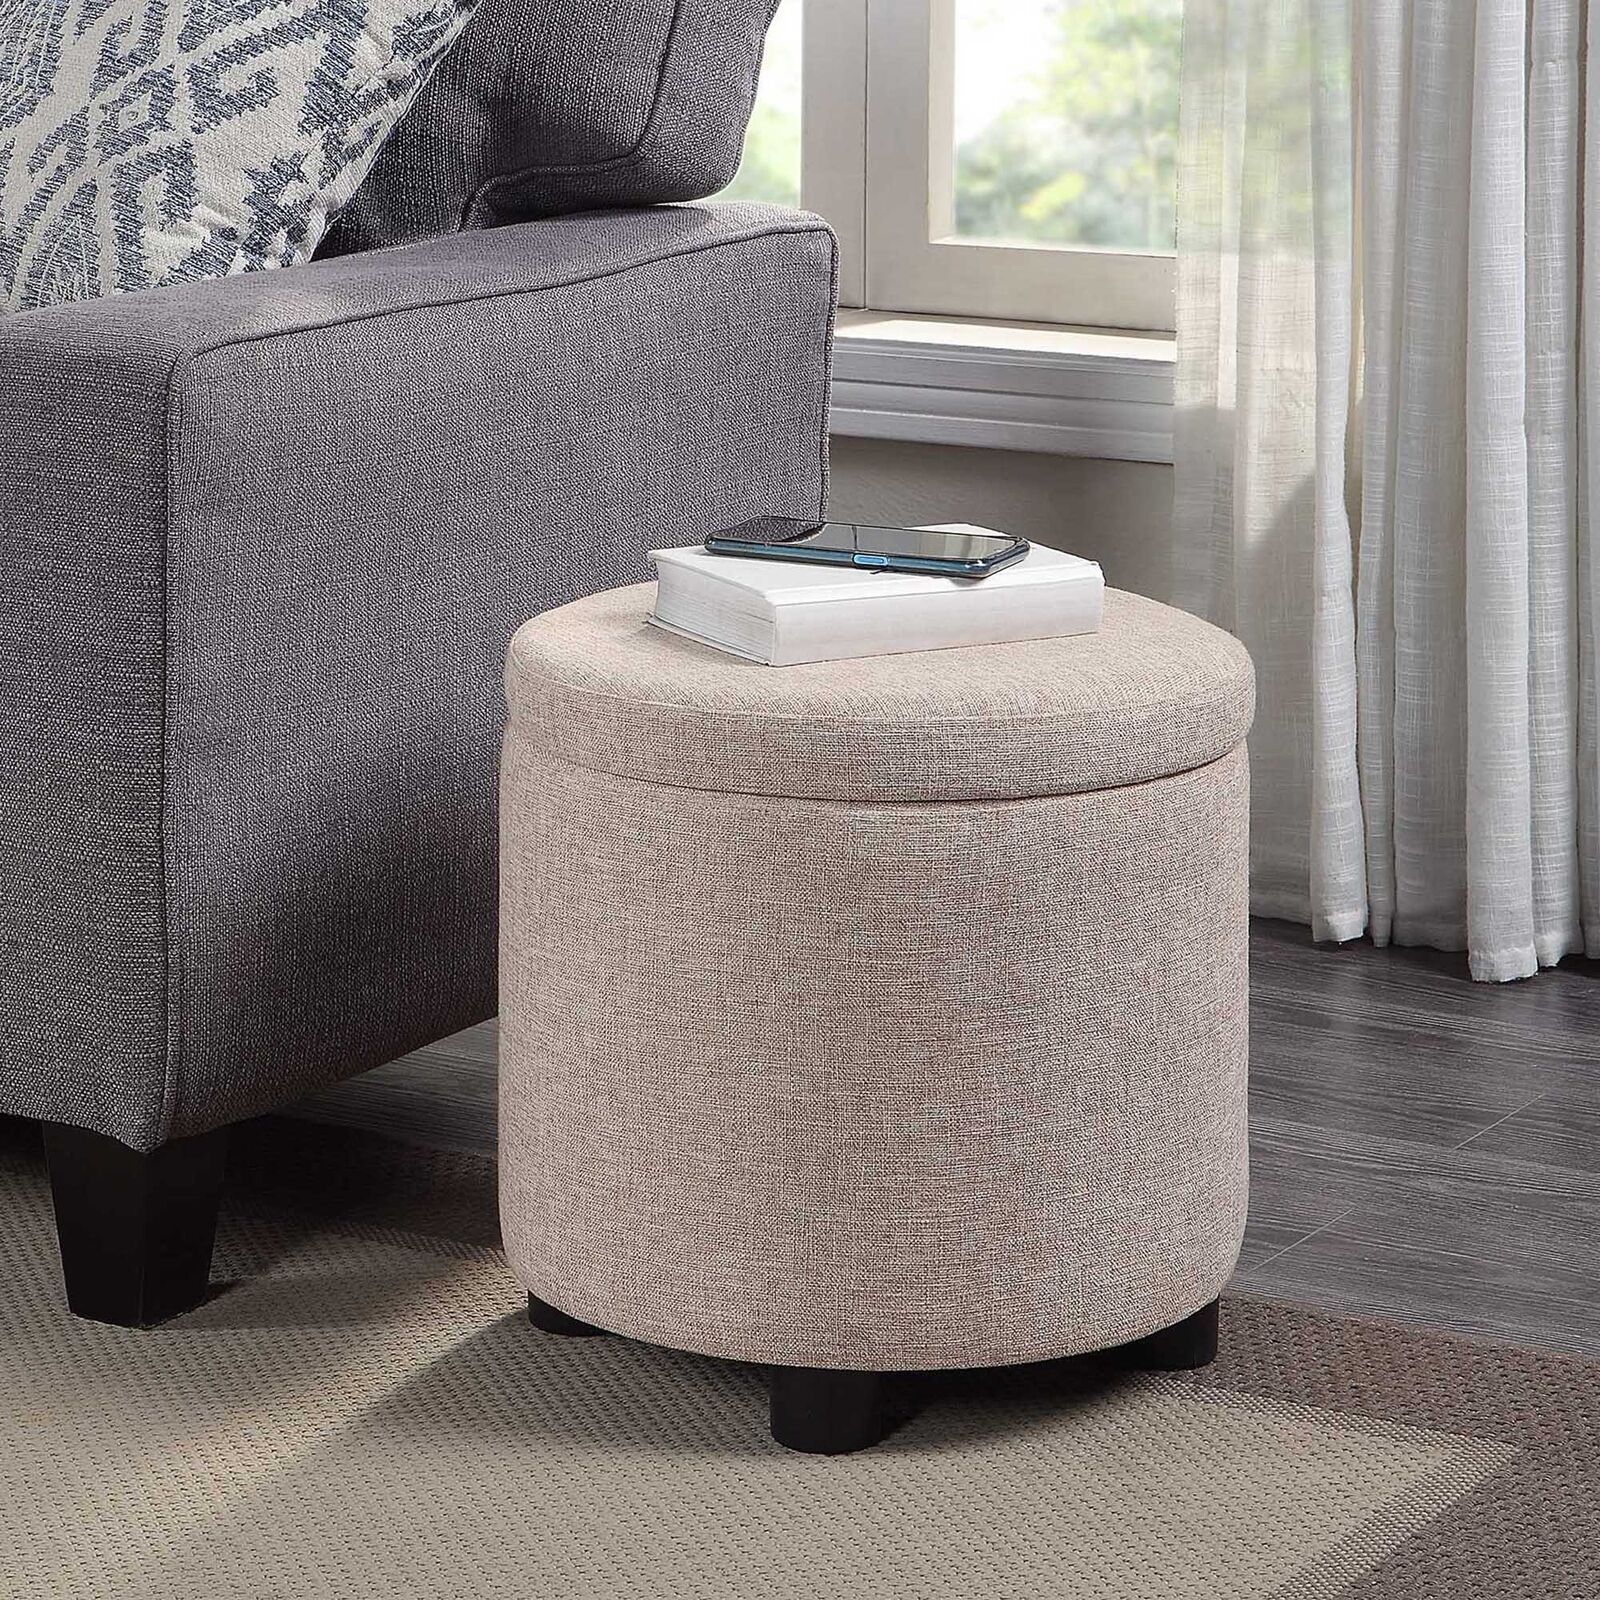 Round Accent Storage Ottoman With Reversible Tray Lid, Tan Fabric | Ebay Inside Ottomans With Stool And Reversible Tray (View 11 of 15)